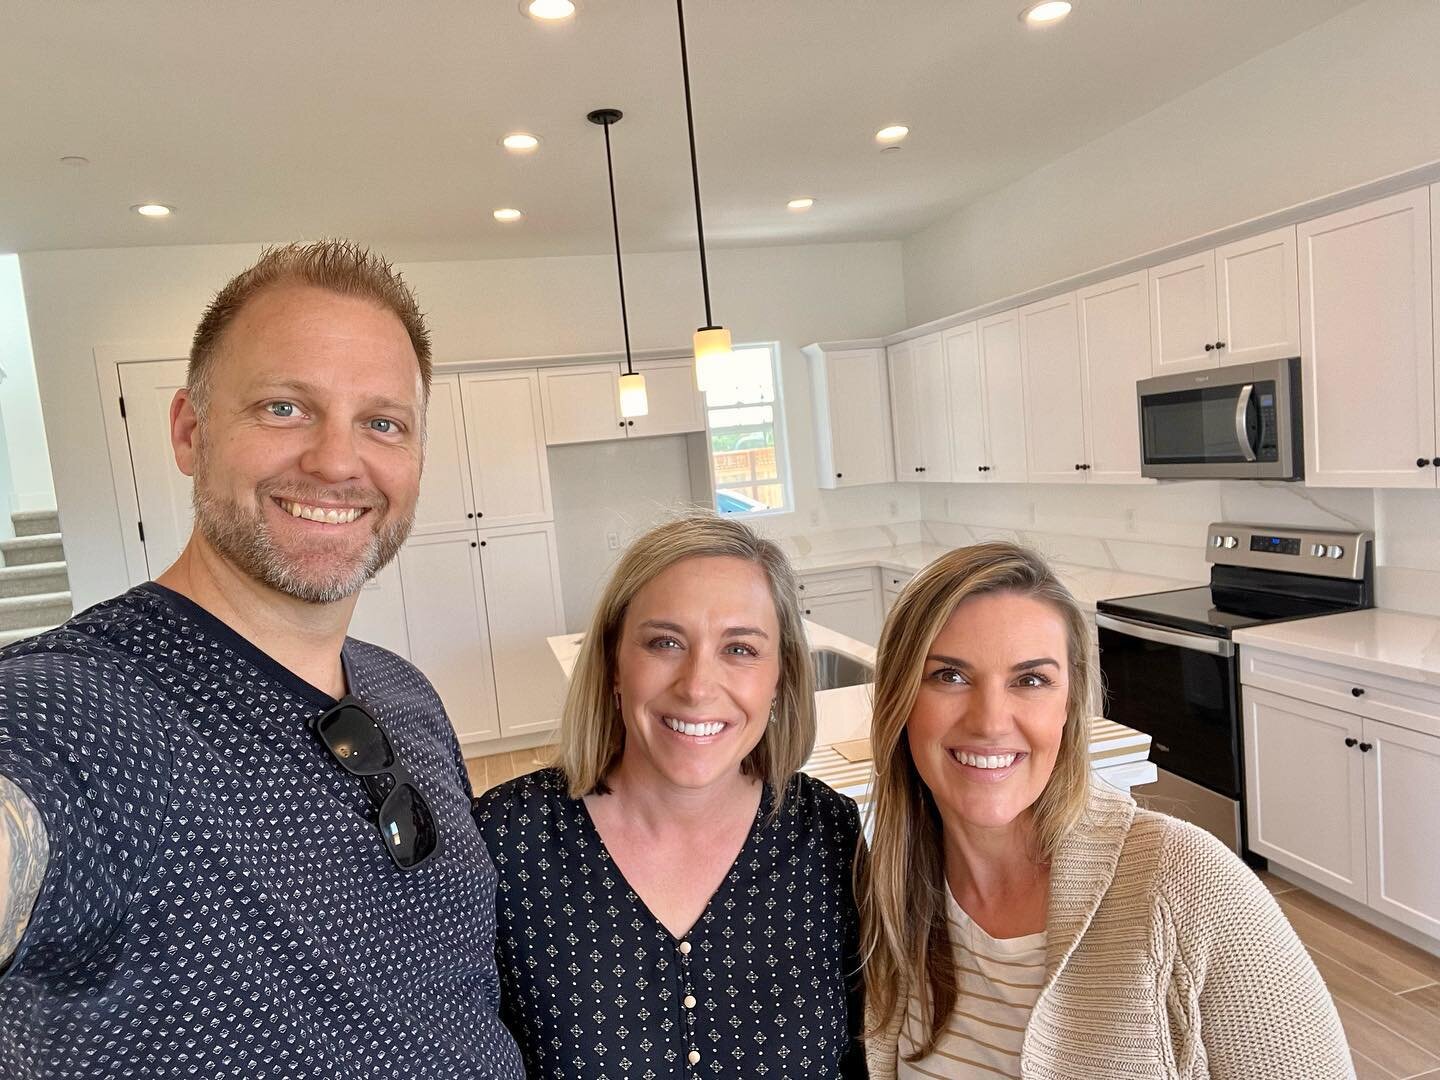 SOLD! 👏 It was such a privilege to support my friends during their home buying journey! They are the proud owners of this brand new home in SLO. Congratulations and Welcome Home! 🔑 🏡 

Kristen Gentry &ndash; DRE #01968754⁠ 
Chris Richardson &ndash